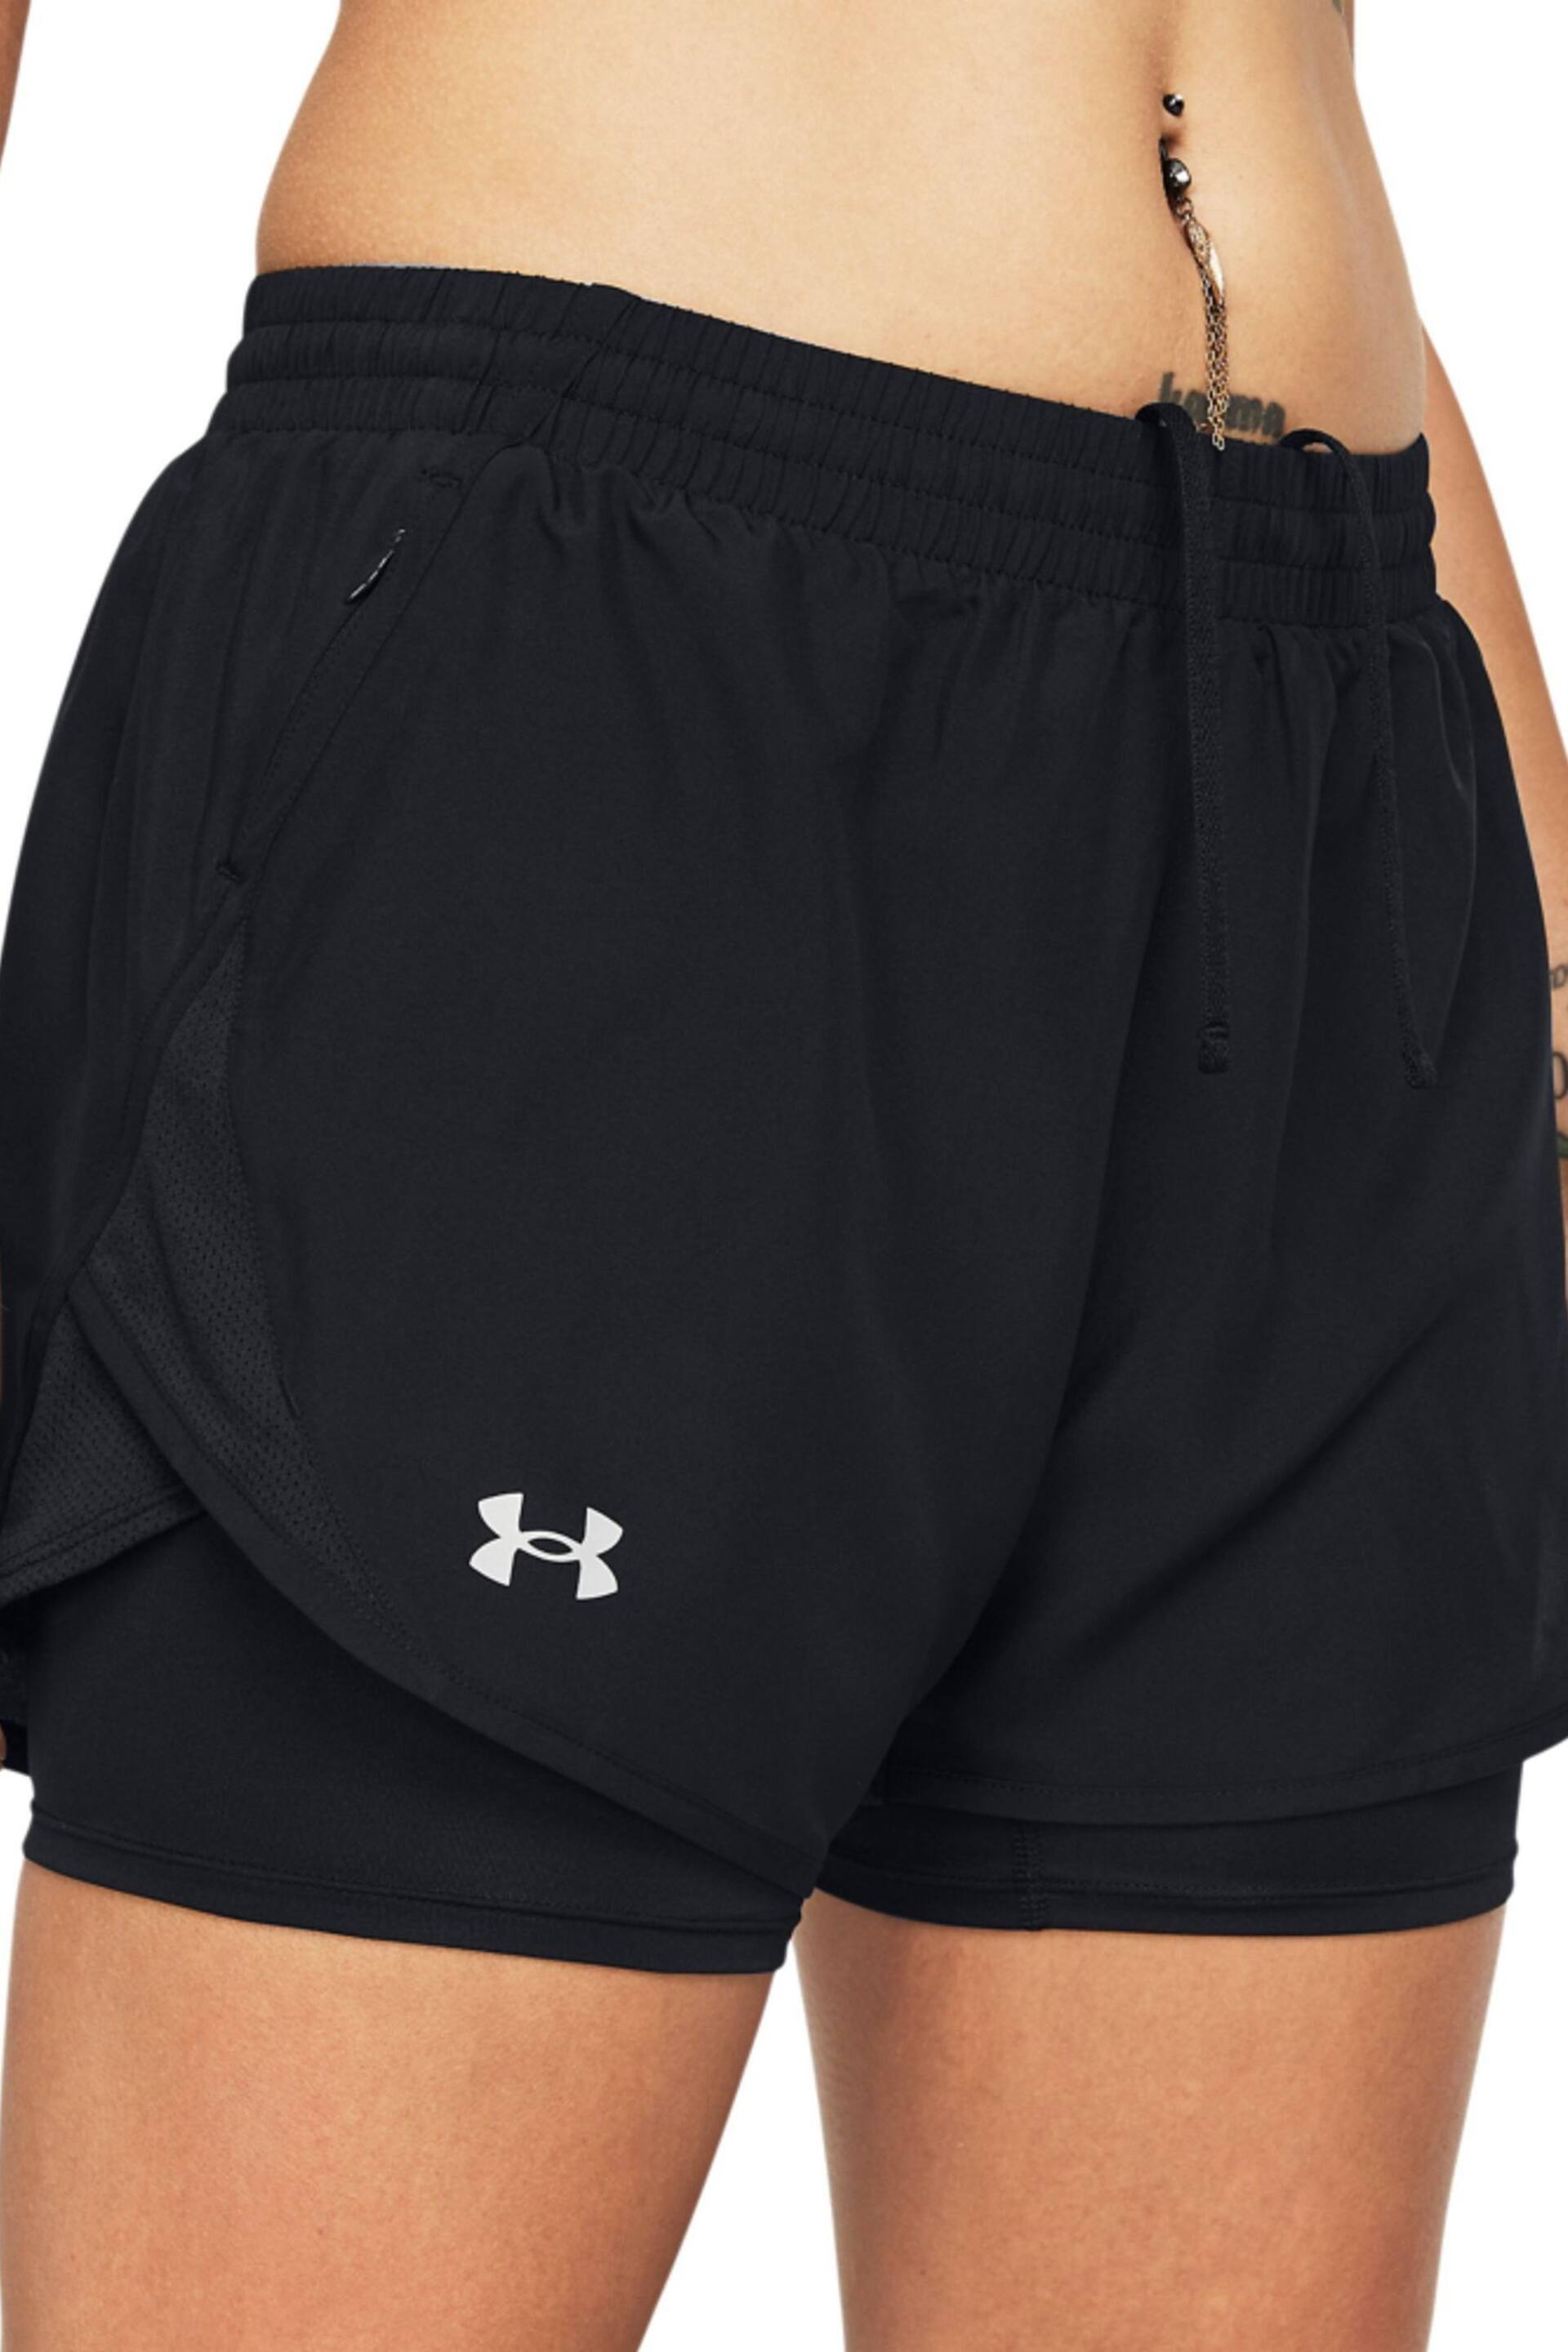 Under Armour Fly By 2 in 1 Black Shorts - Image 4 of 4